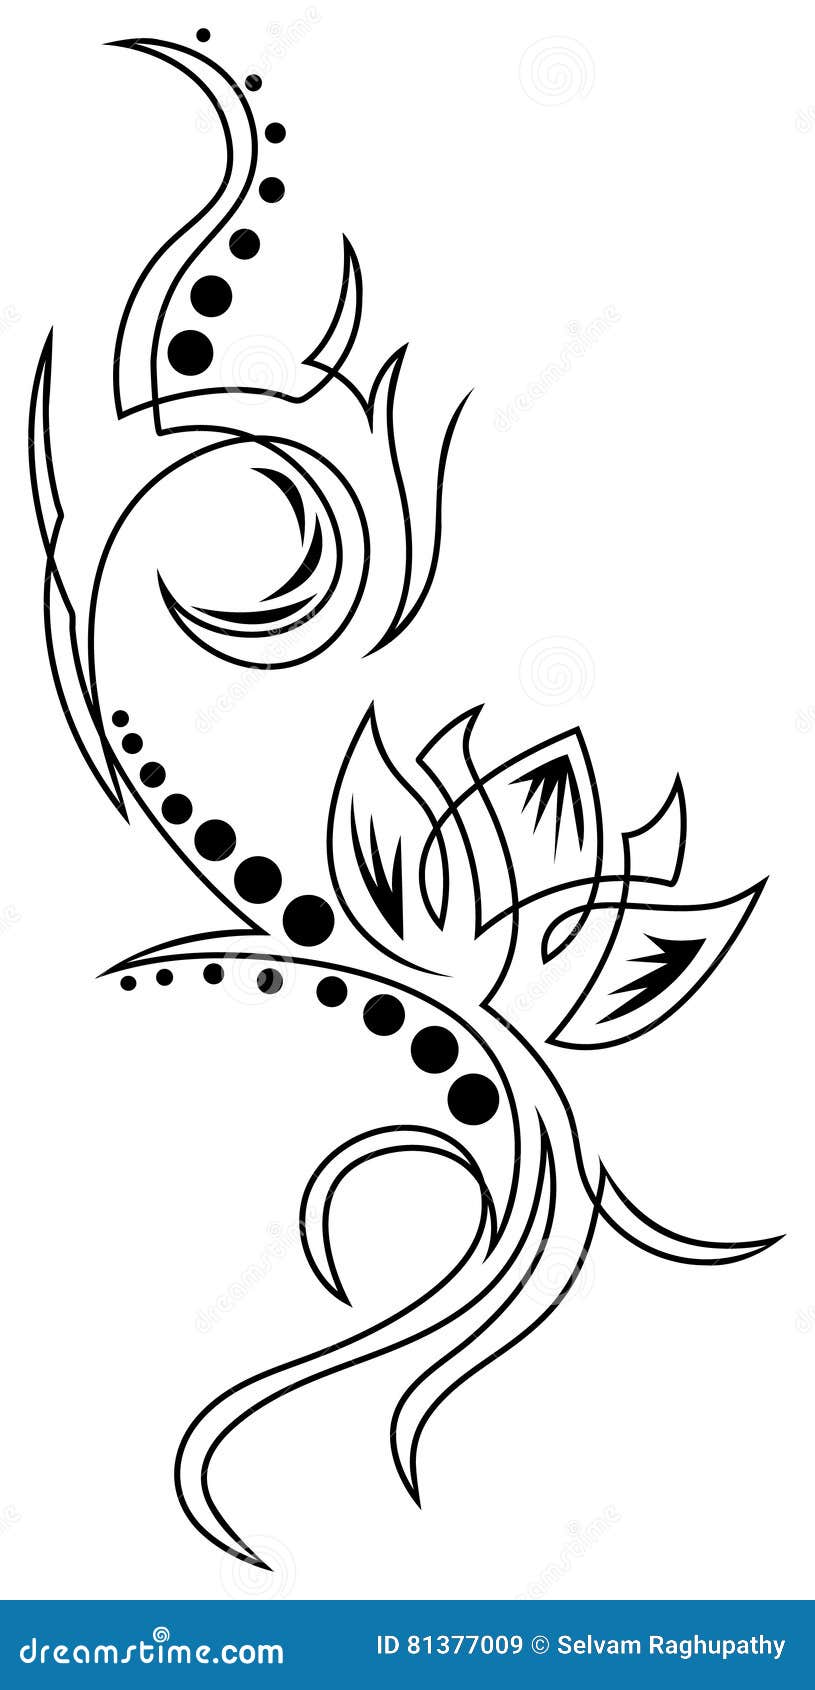 Lotus tattoo stock vector. Illustration of asia, curved - 81377009